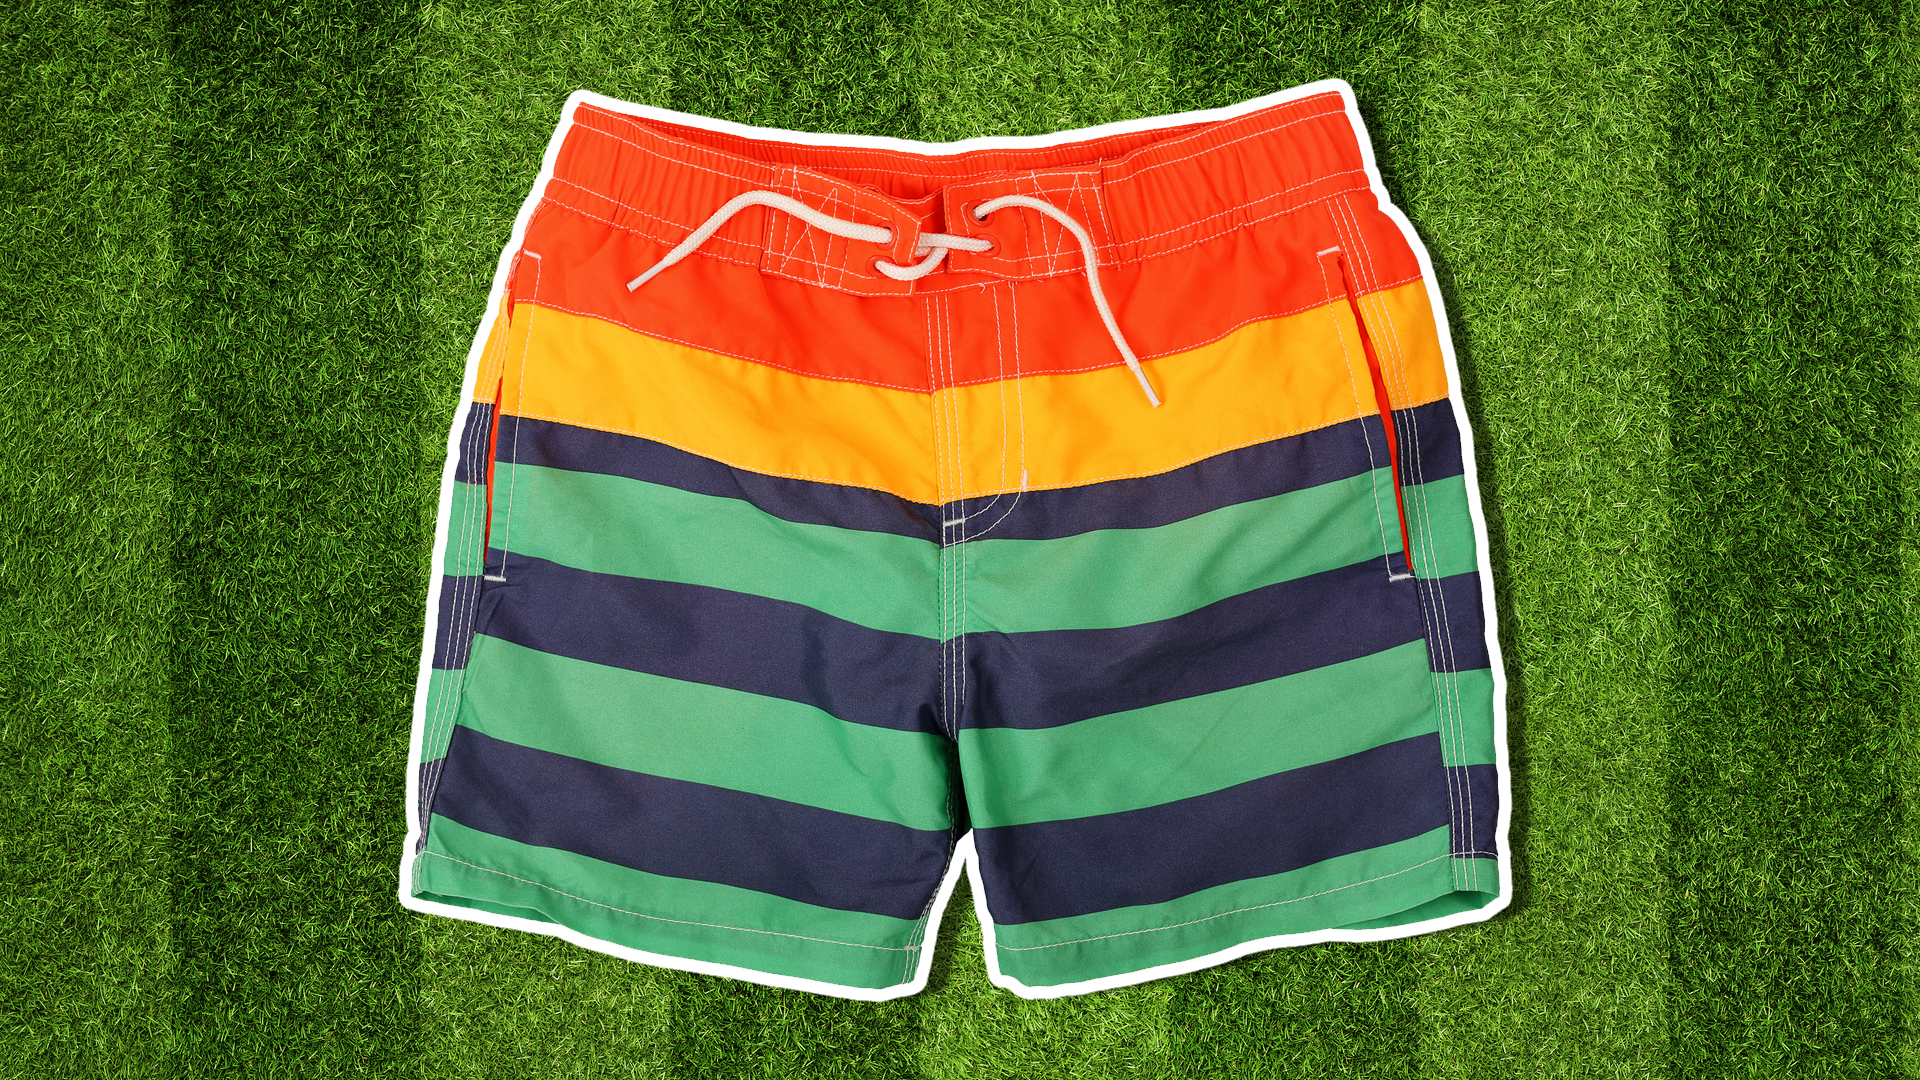 A striped pair of shorts